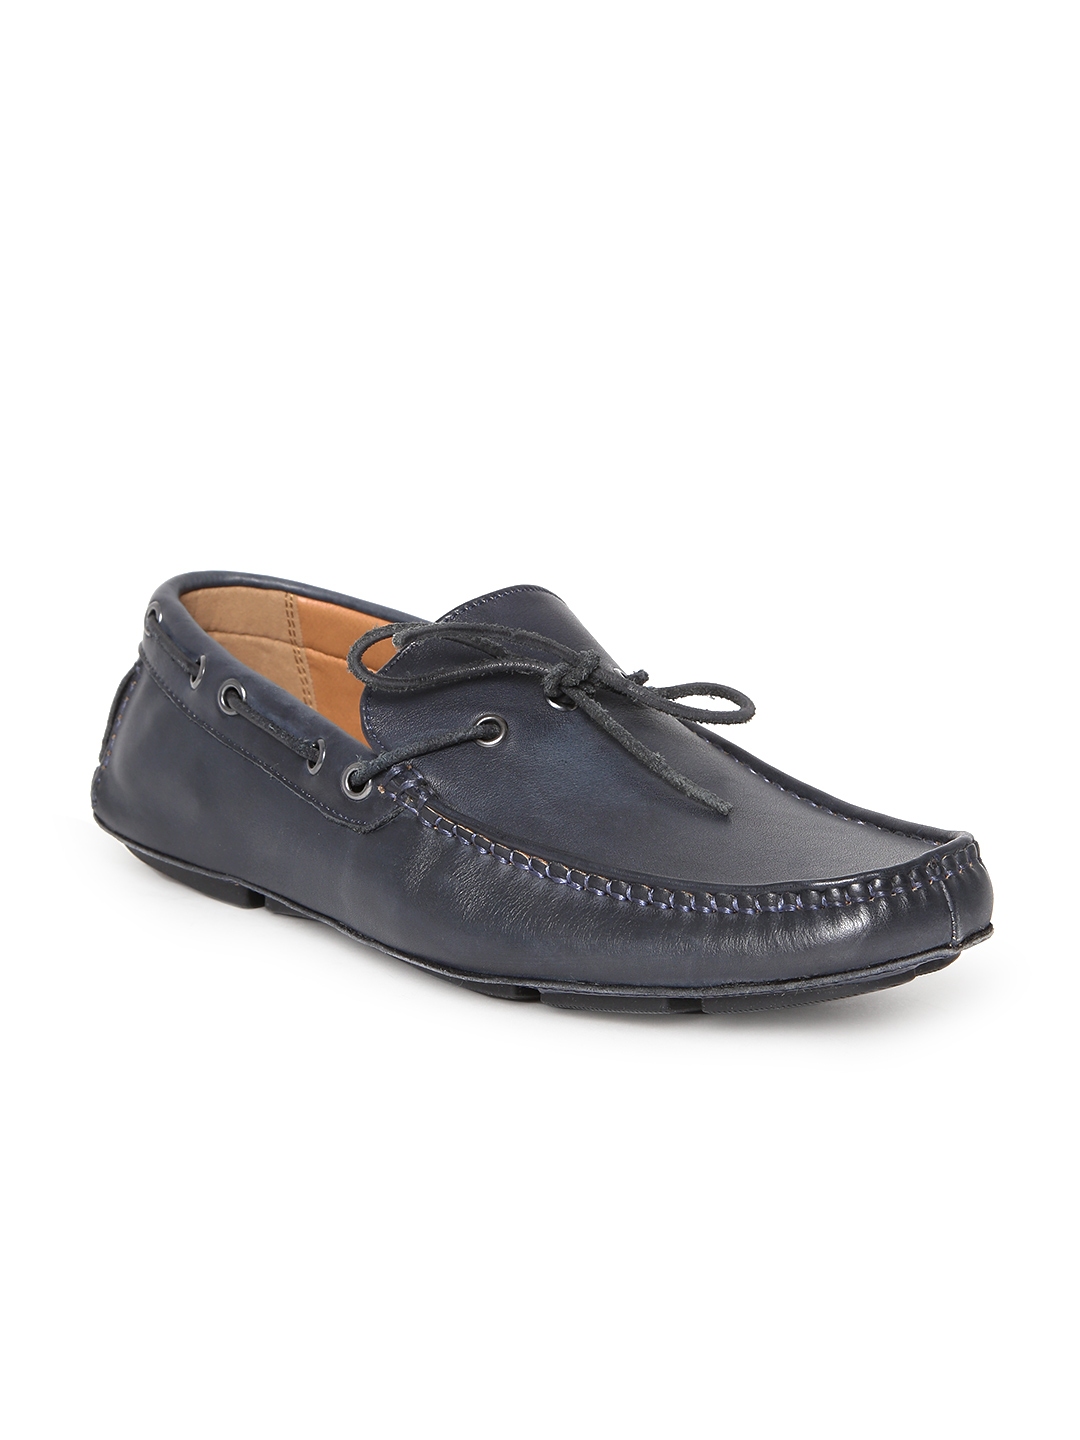 Buy Kenneth Cole New York Men Navy Take Over Leather Boat Shoes ...